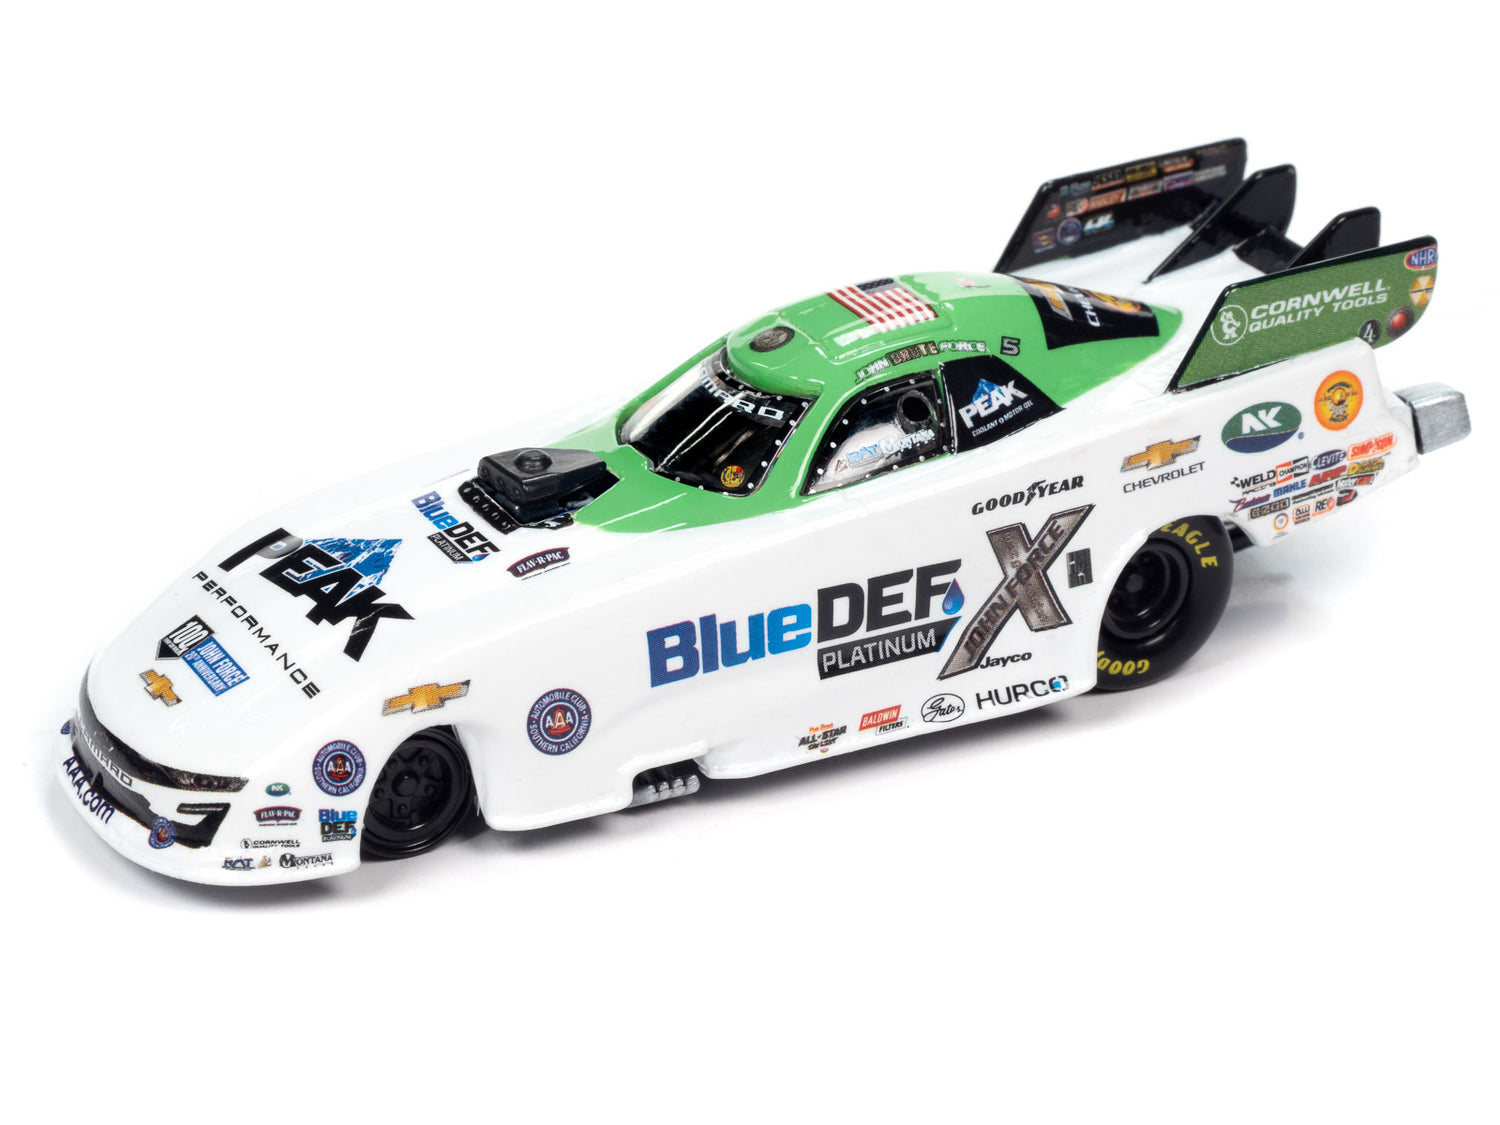 Racing Champions 2022 John "Brute" Force Blue Def Chevrolet Funny Car 1:64 Scale Diecast